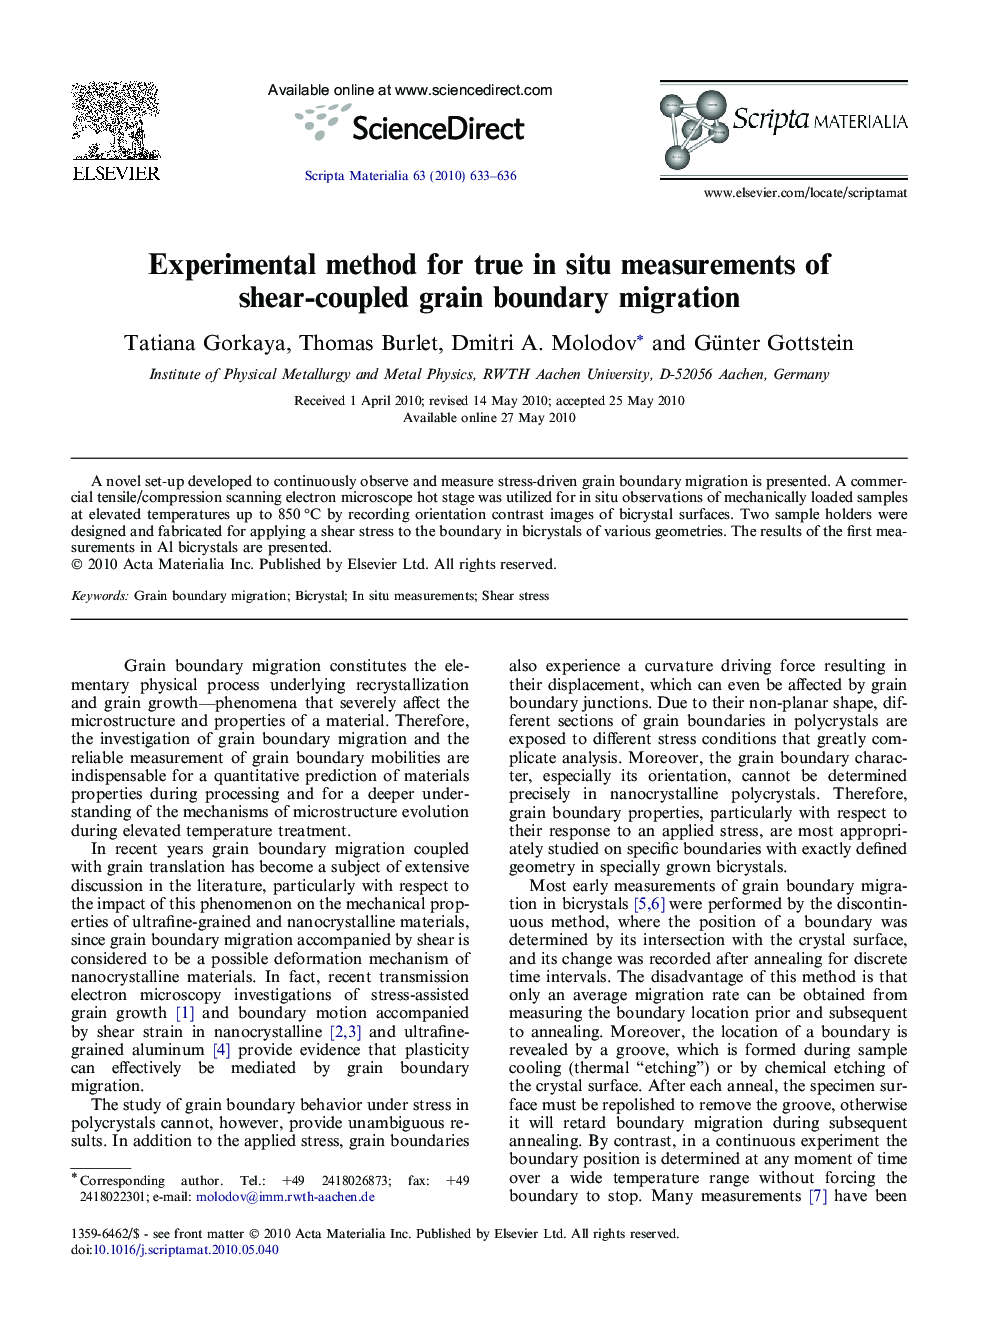 Experimental method for true in situ measurements of shear-coupled grain boundary migration